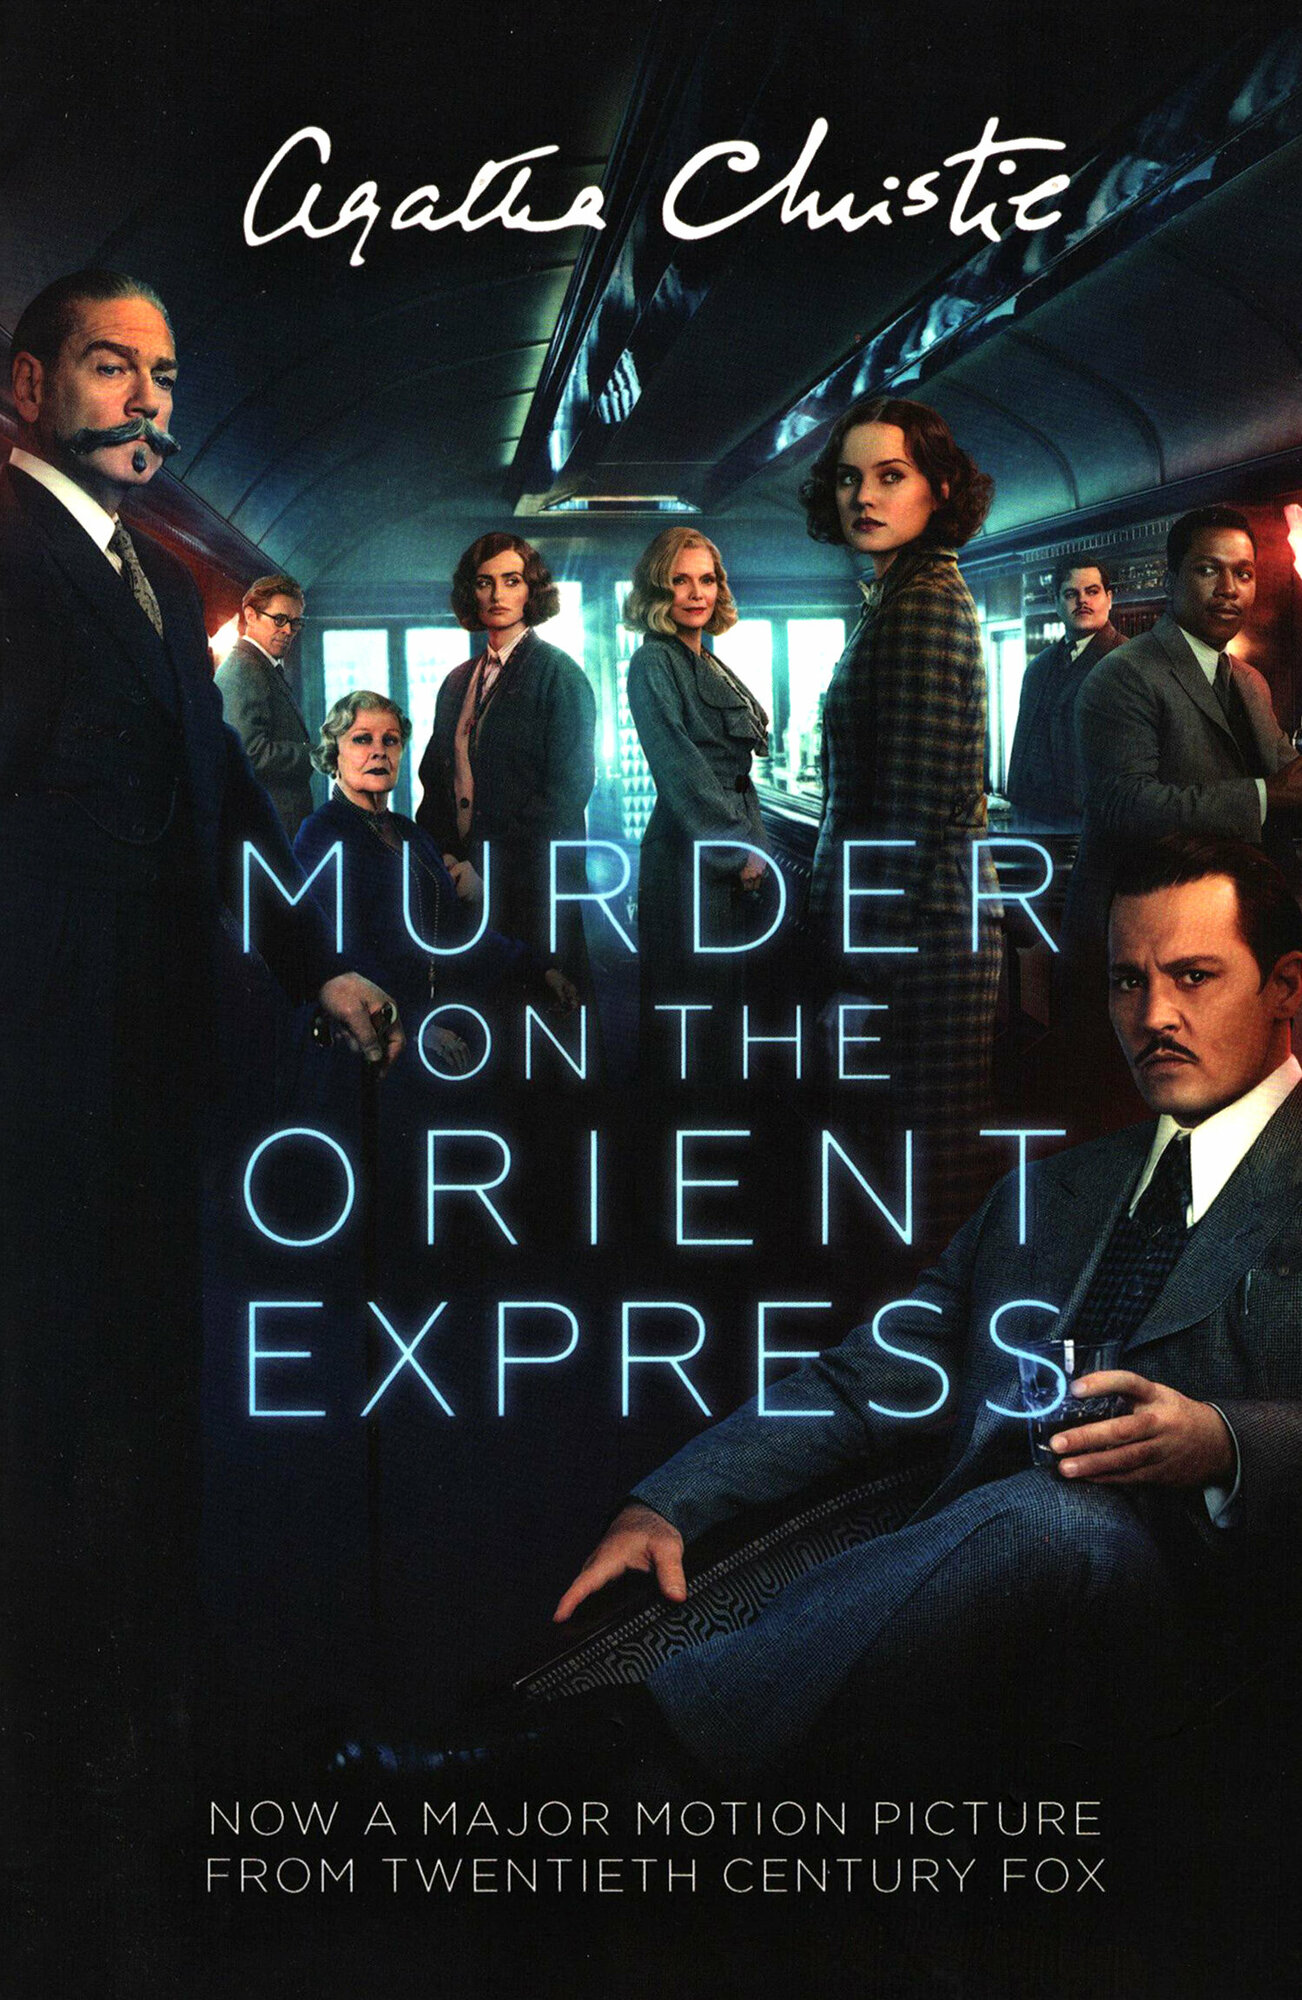 Murder On The Orient Express (Кристи Агата) - фото №2